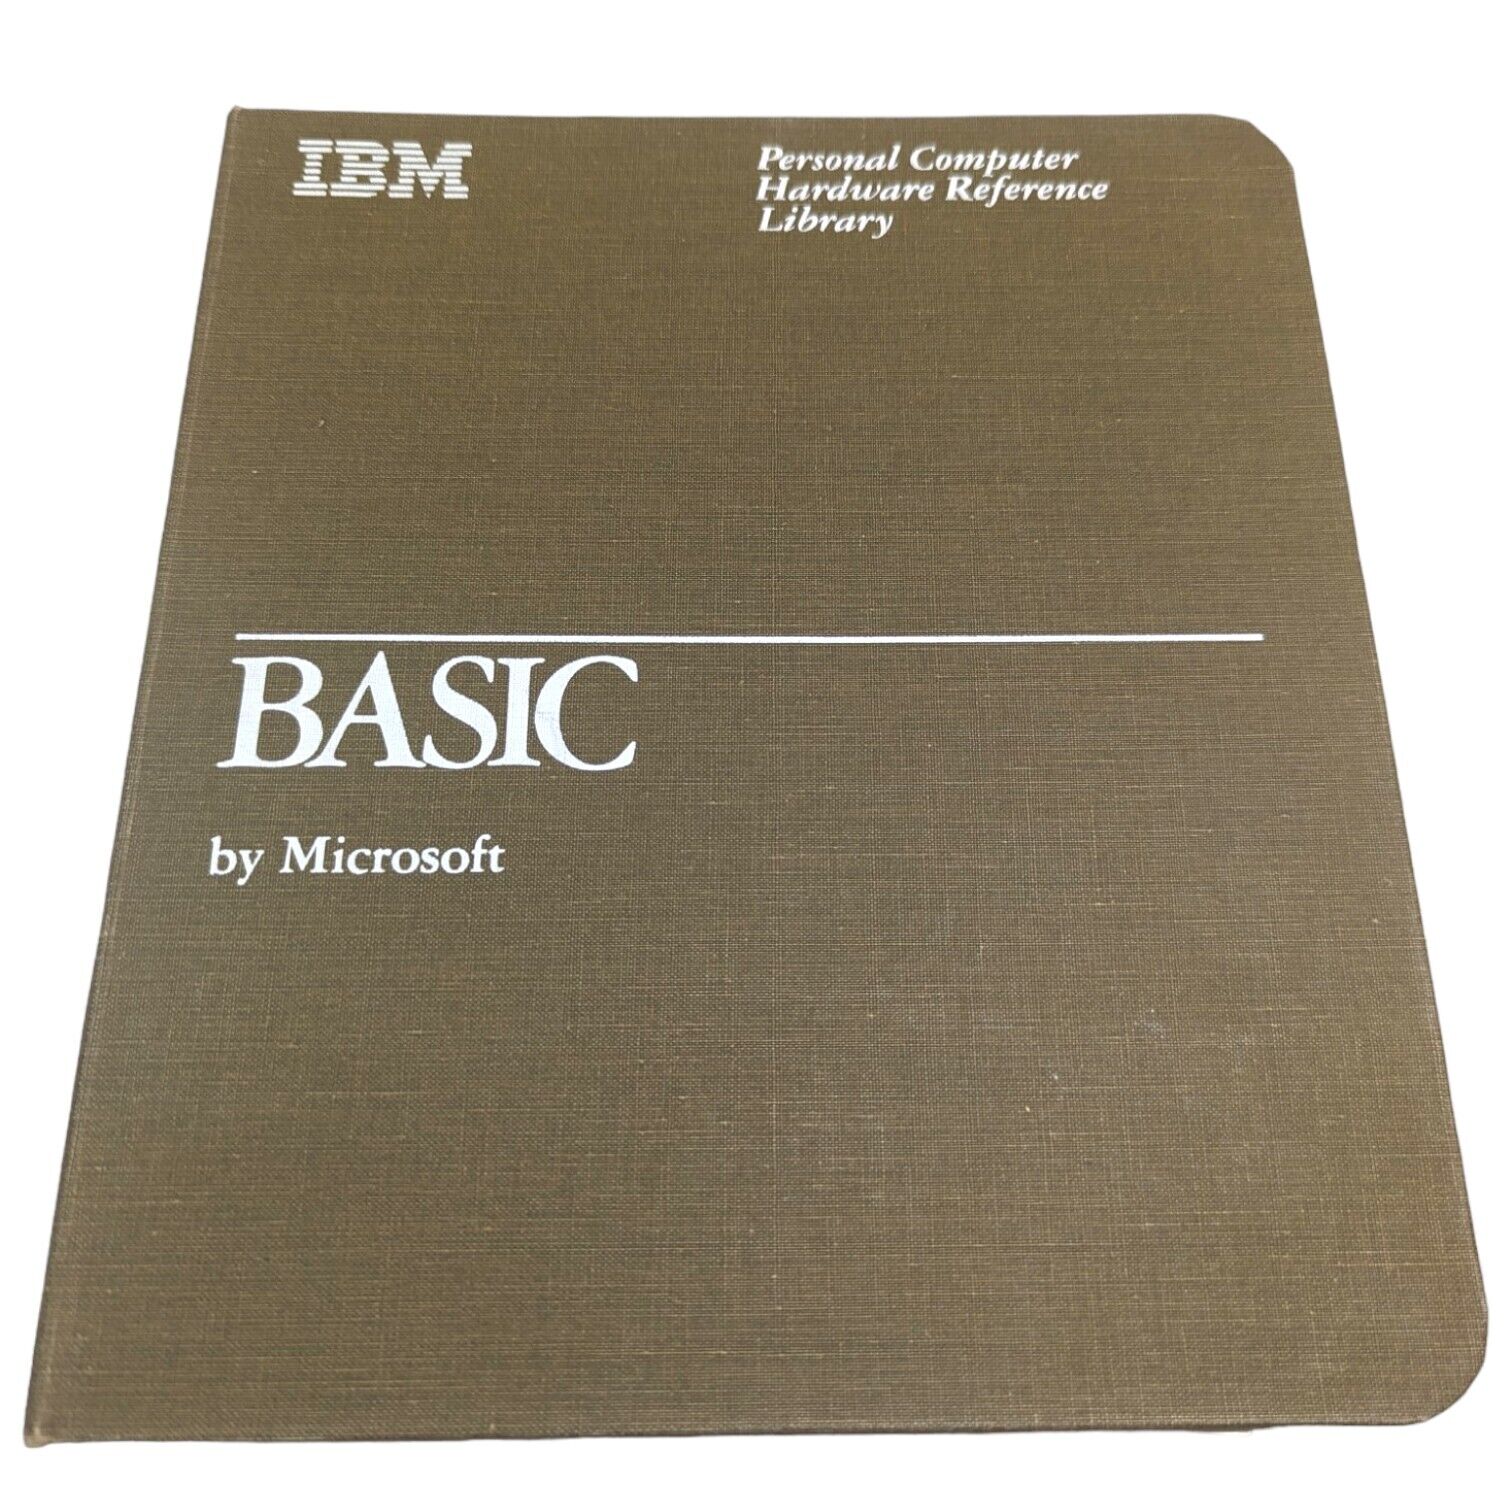 1982 IBM Personal Computer Hardware Reference Library Basic By Microsoft 6025013